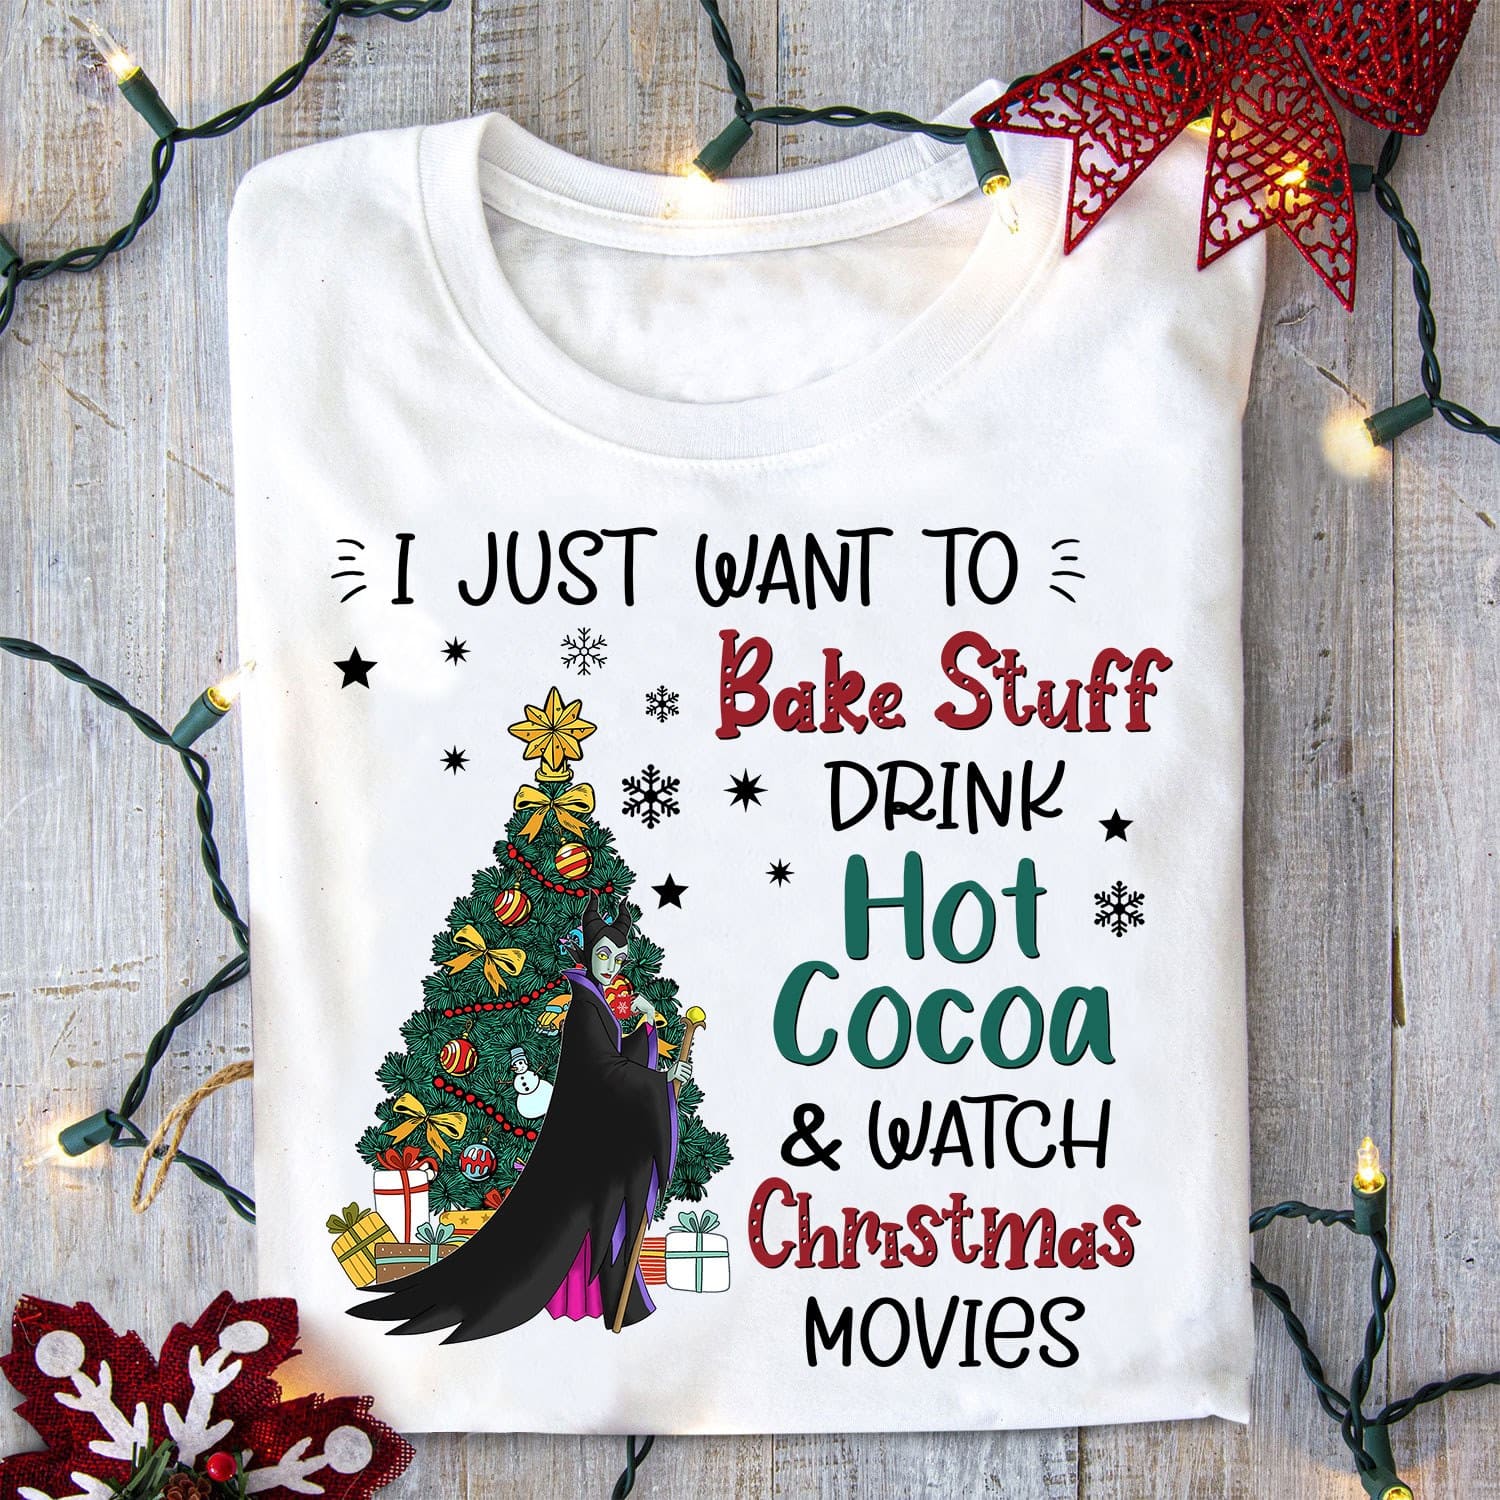 I just want to bake stuff, drink hot cocoa, watch Christmas movie - Gift for little Christmas